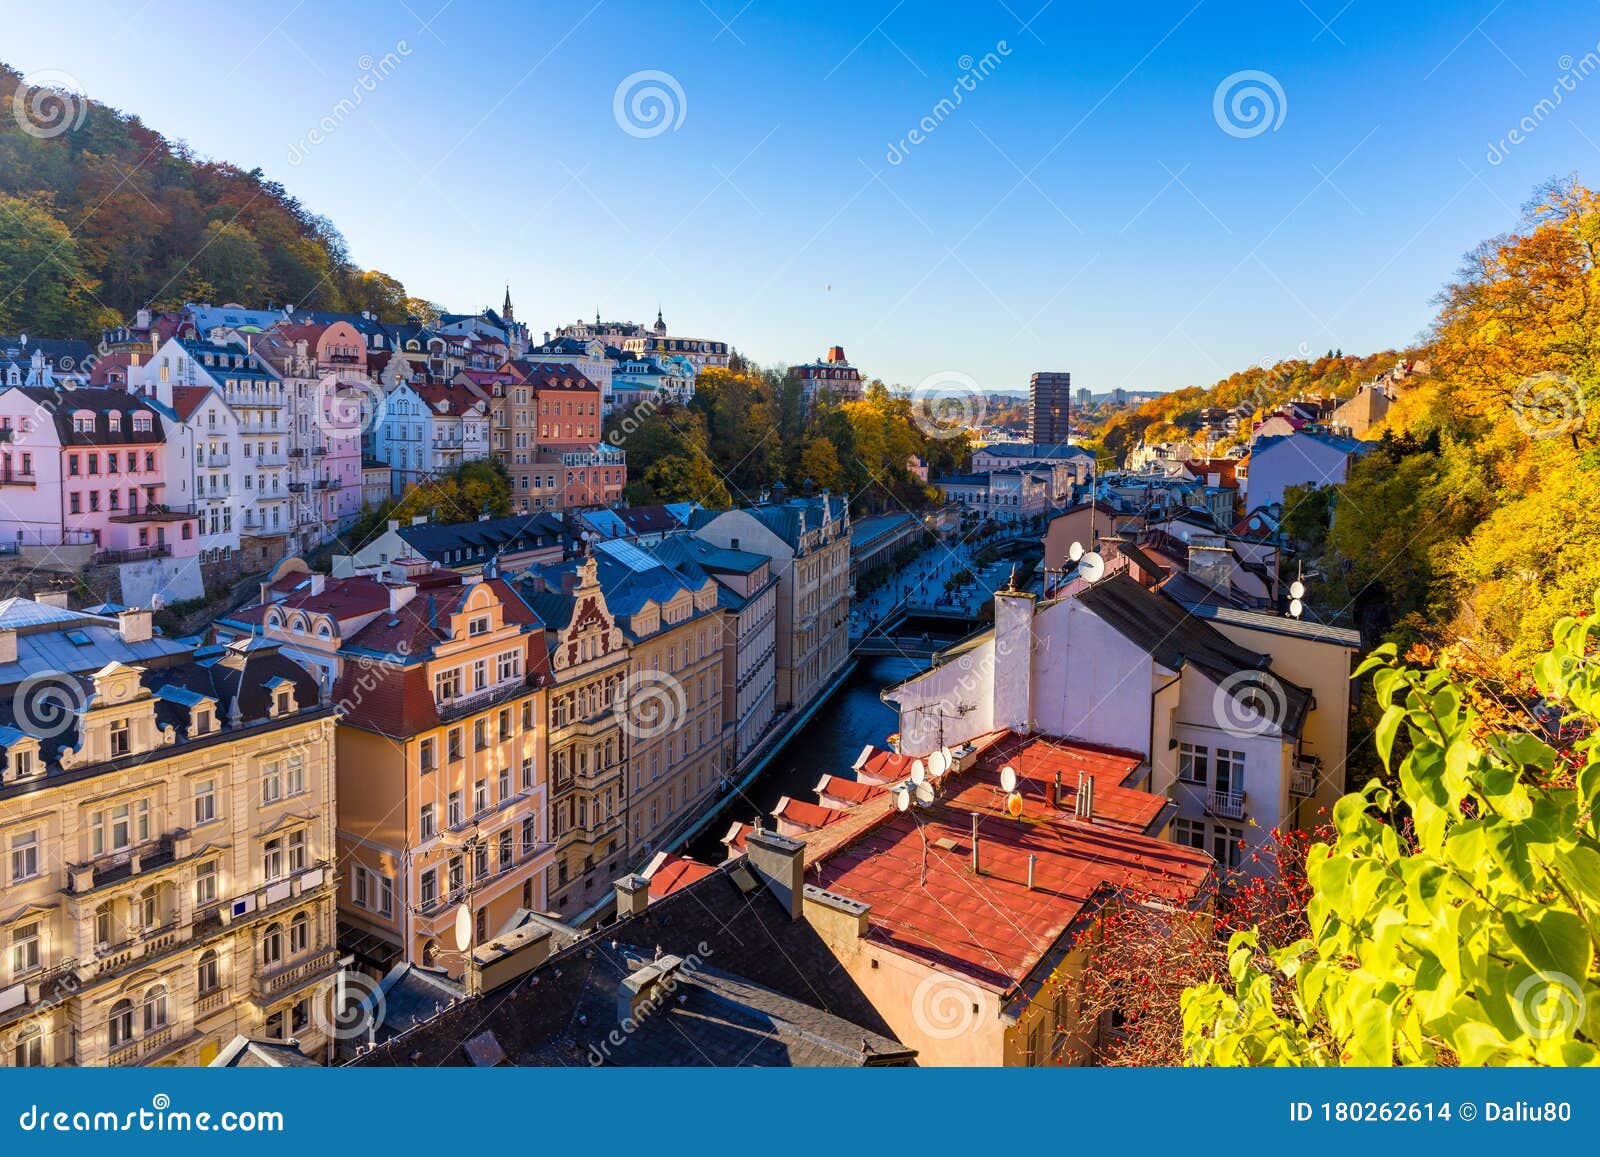 autumn view of old town of karlovy vary carlsbad, czech republic, europe